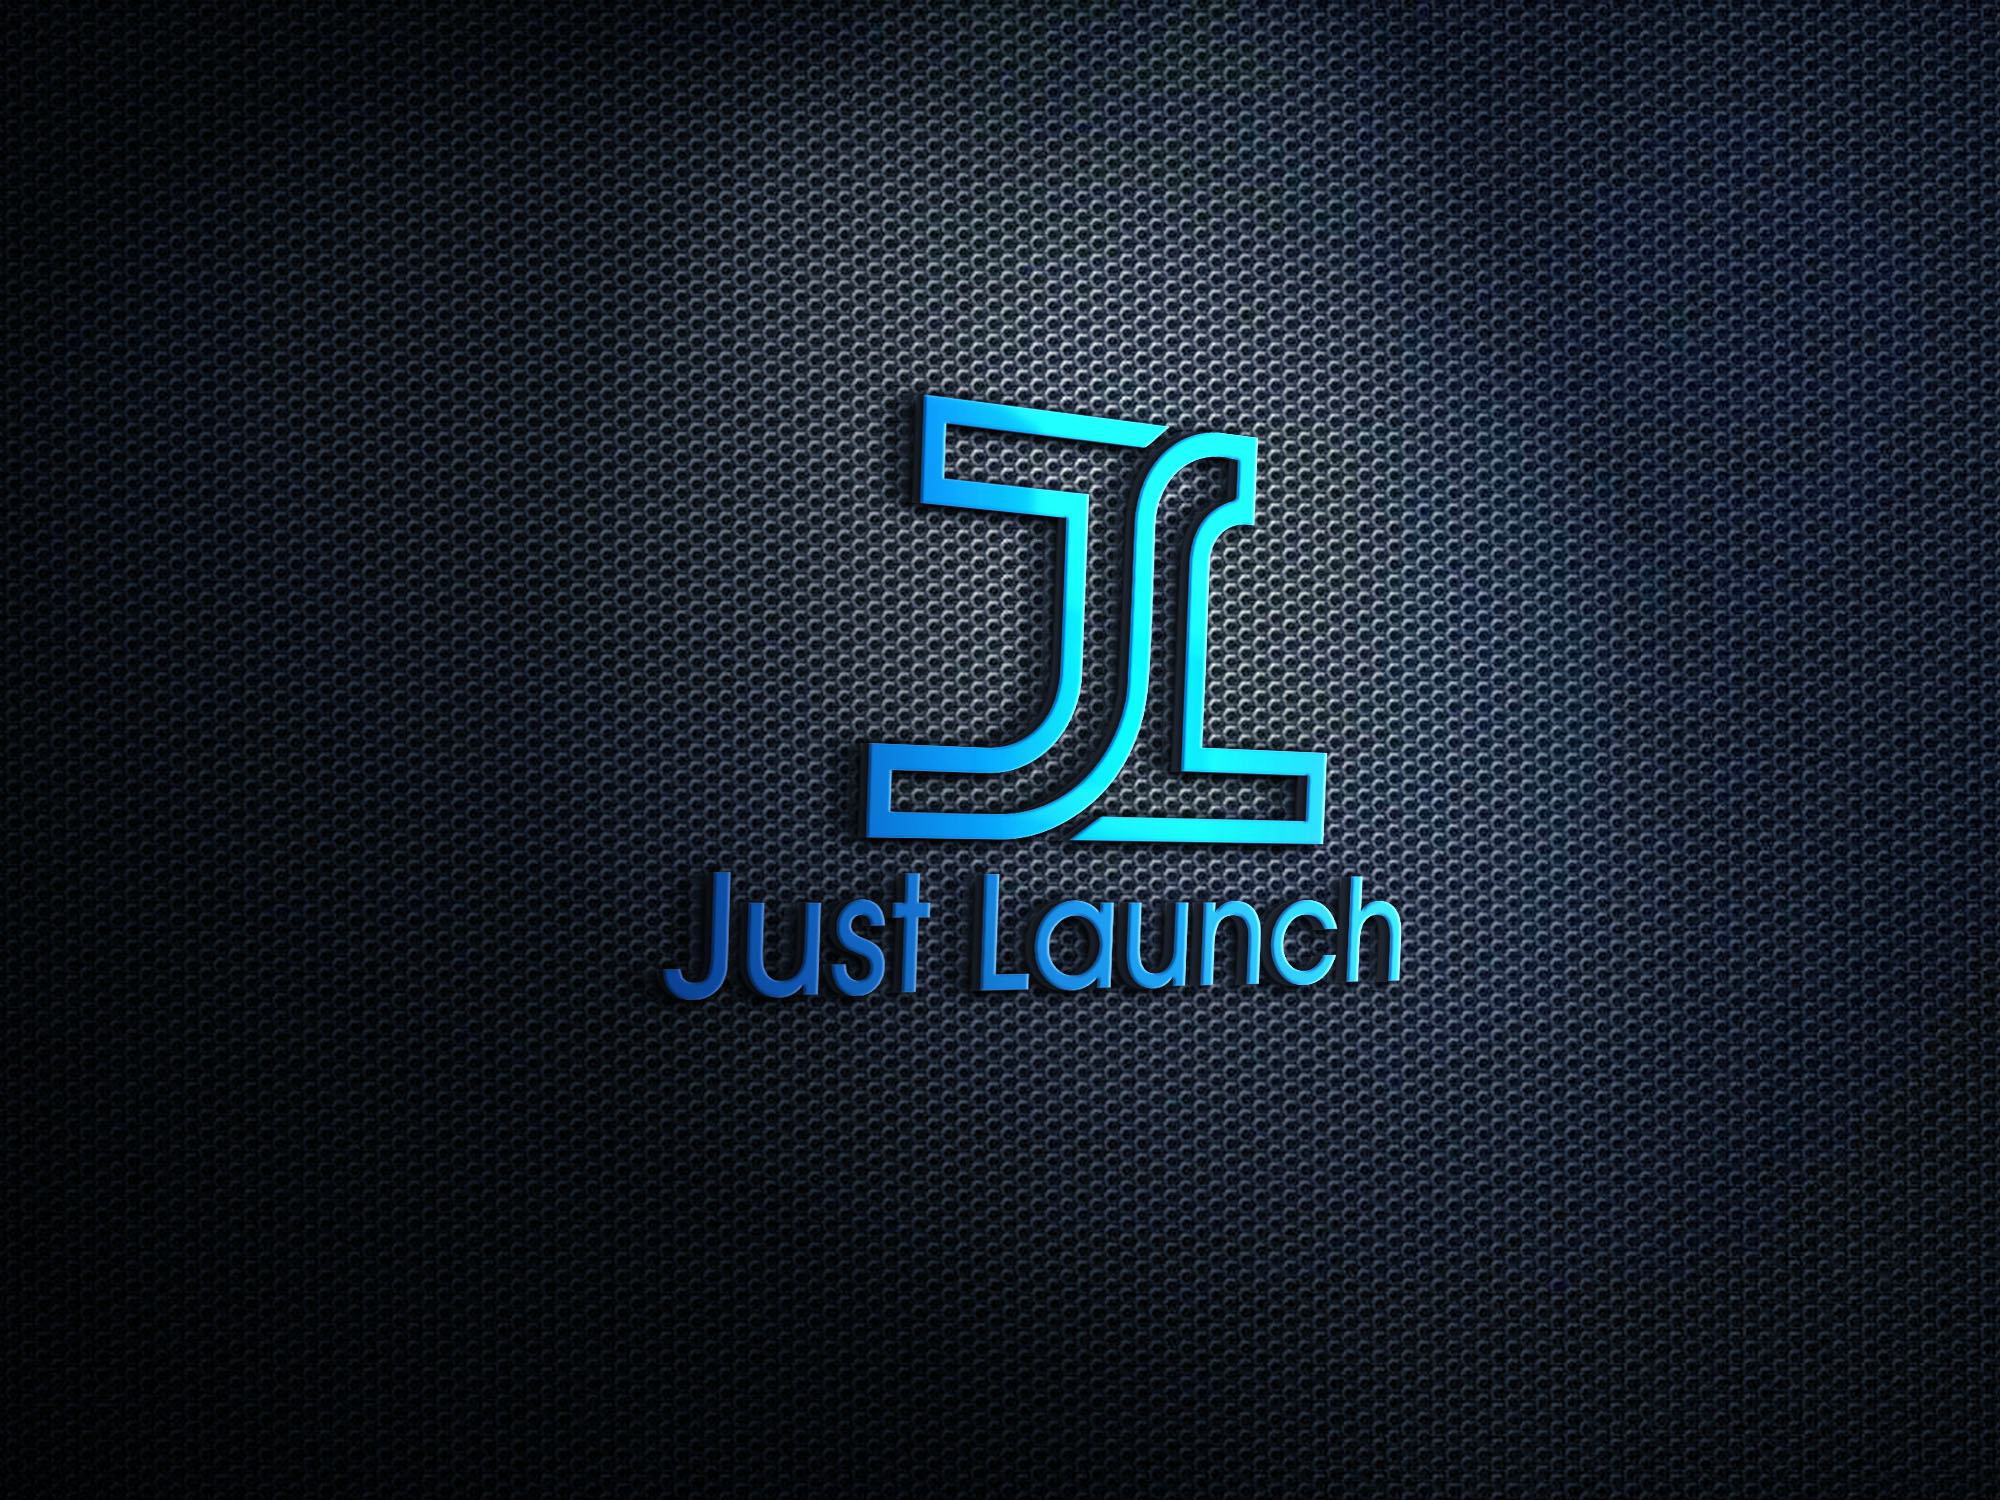 Become Part of Our Launcher Community